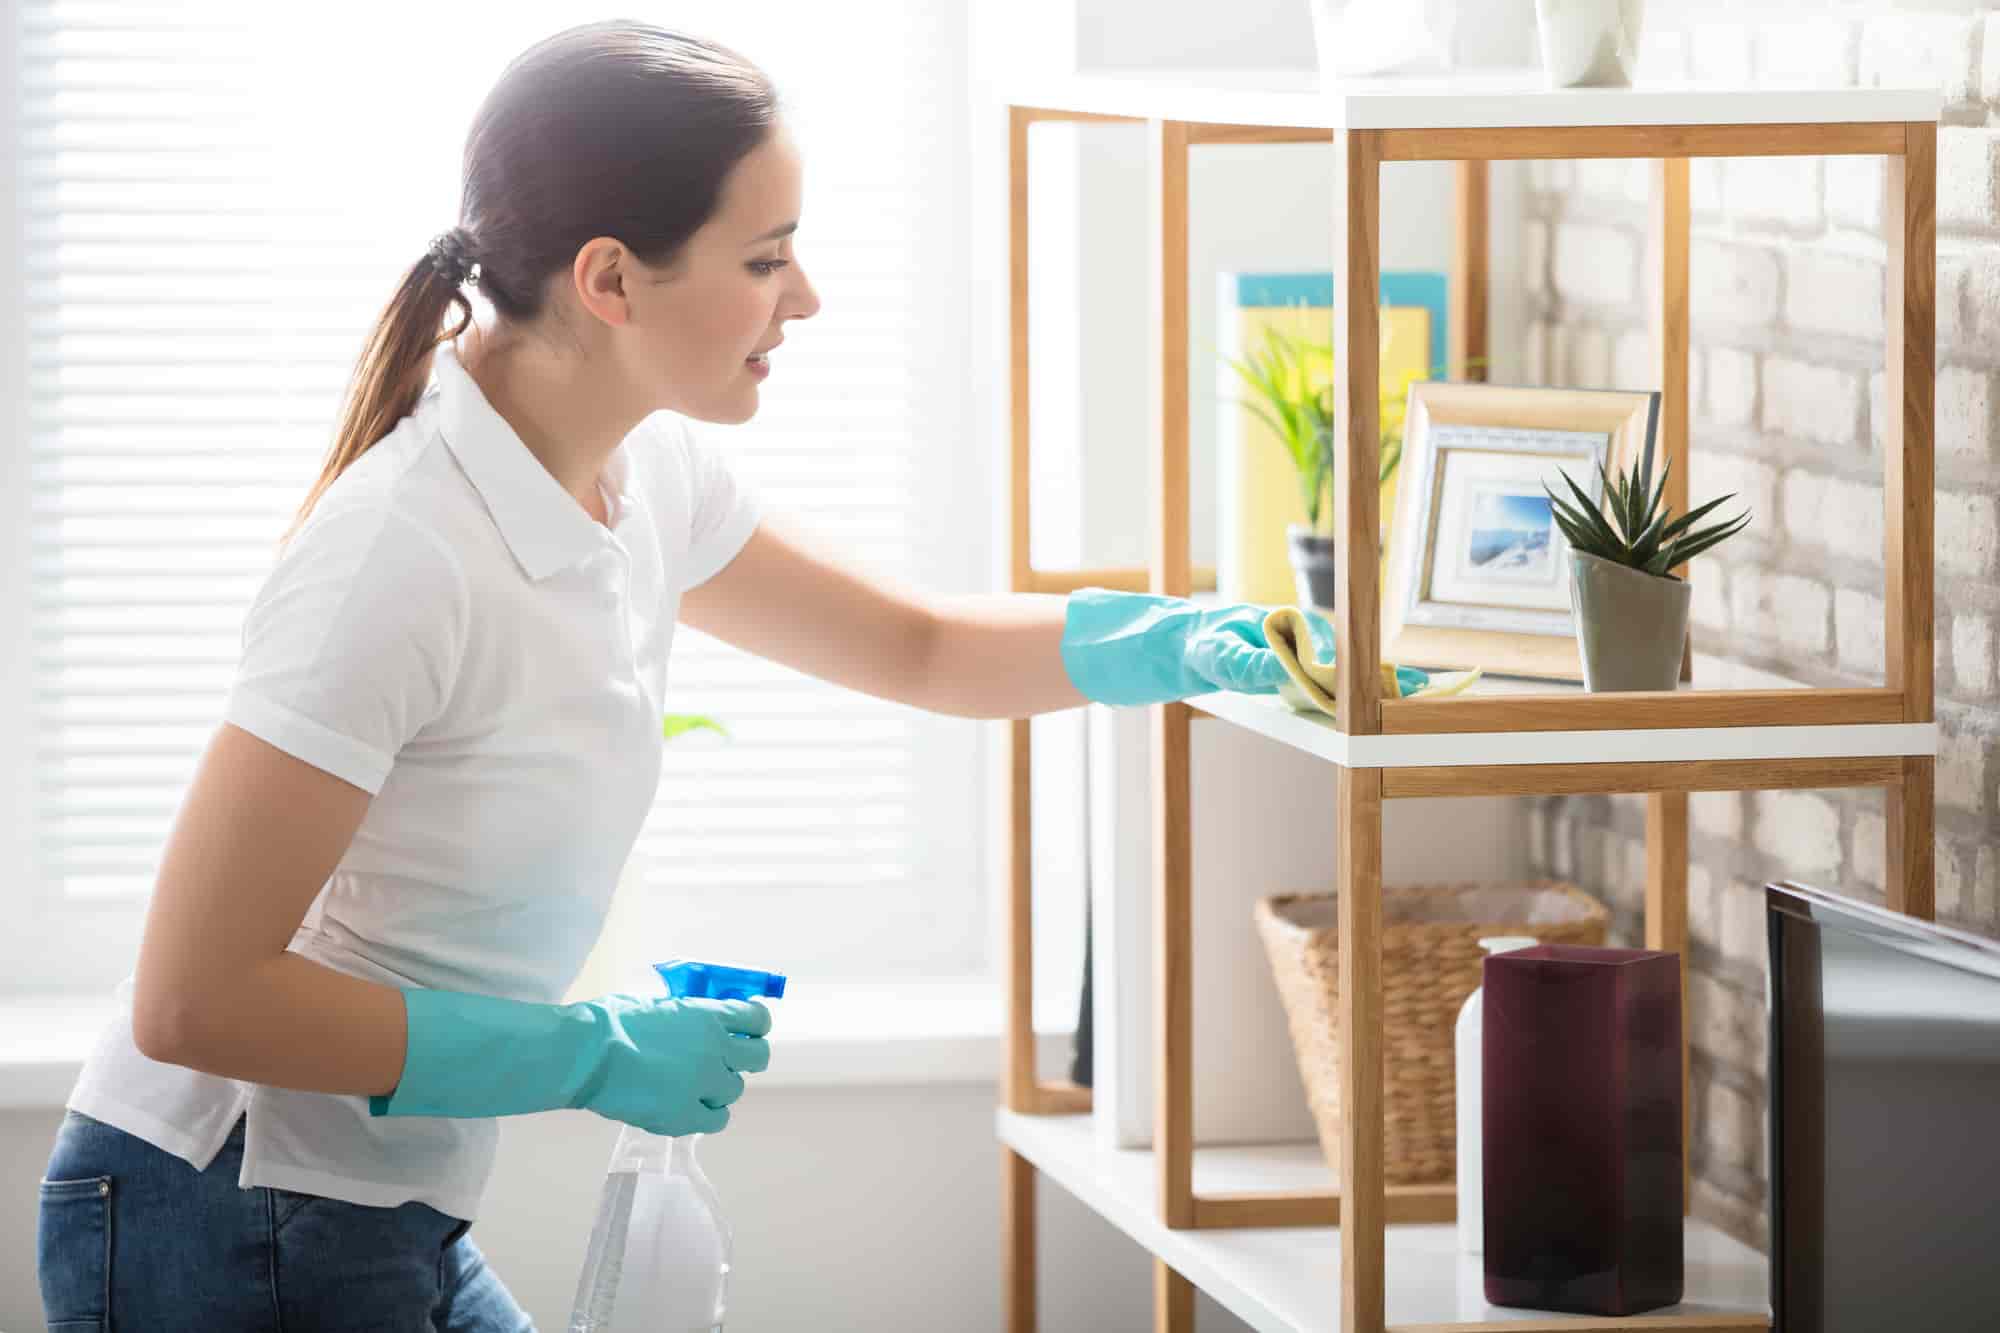 Housekeeper Placement Services Near You in Newport Beach, CA:, You’ve Got It Maid